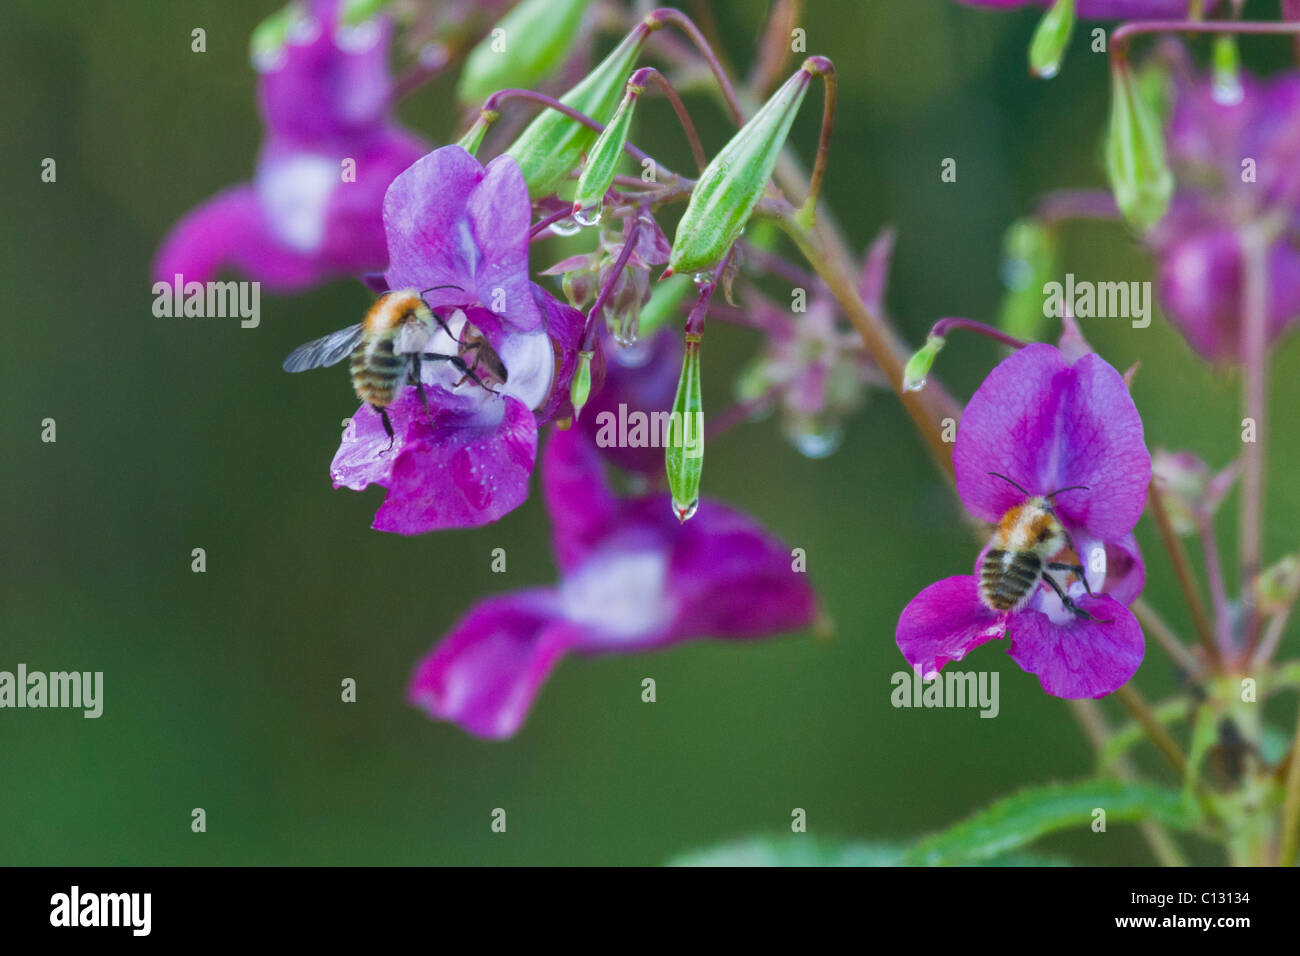 Carder or Meadow Bumble Bees (Bombus agrorum), feeding on Himalayan Balsam flower, Lower Saxony, Germany Stock Photo